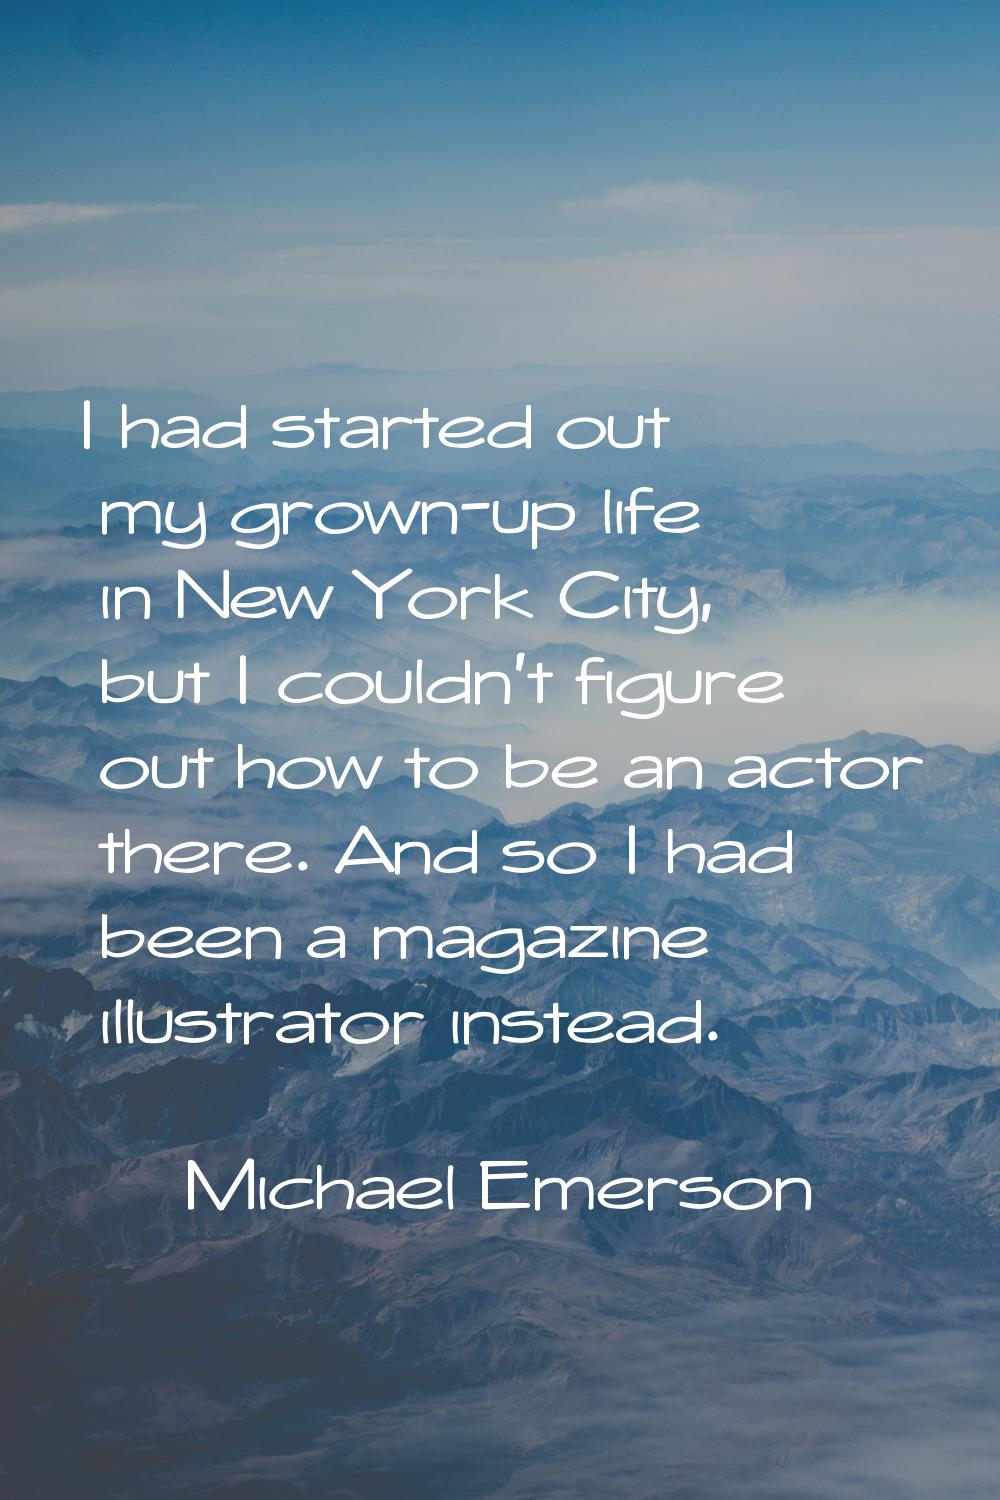 I had started out my grown-up life in New York City, but I couldn't figure out how to be an actor t